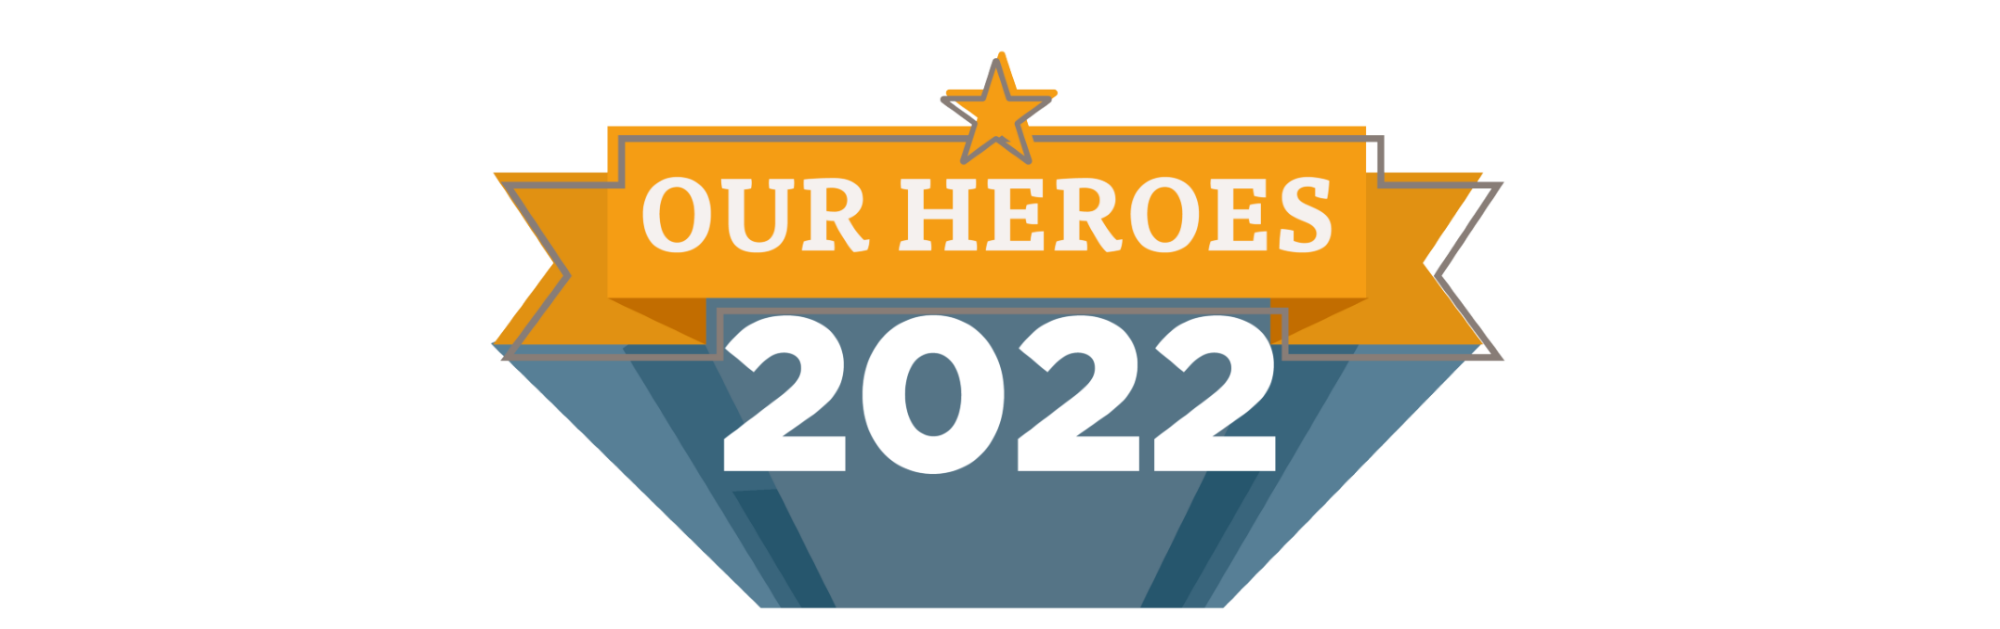 Our Heroes 2022